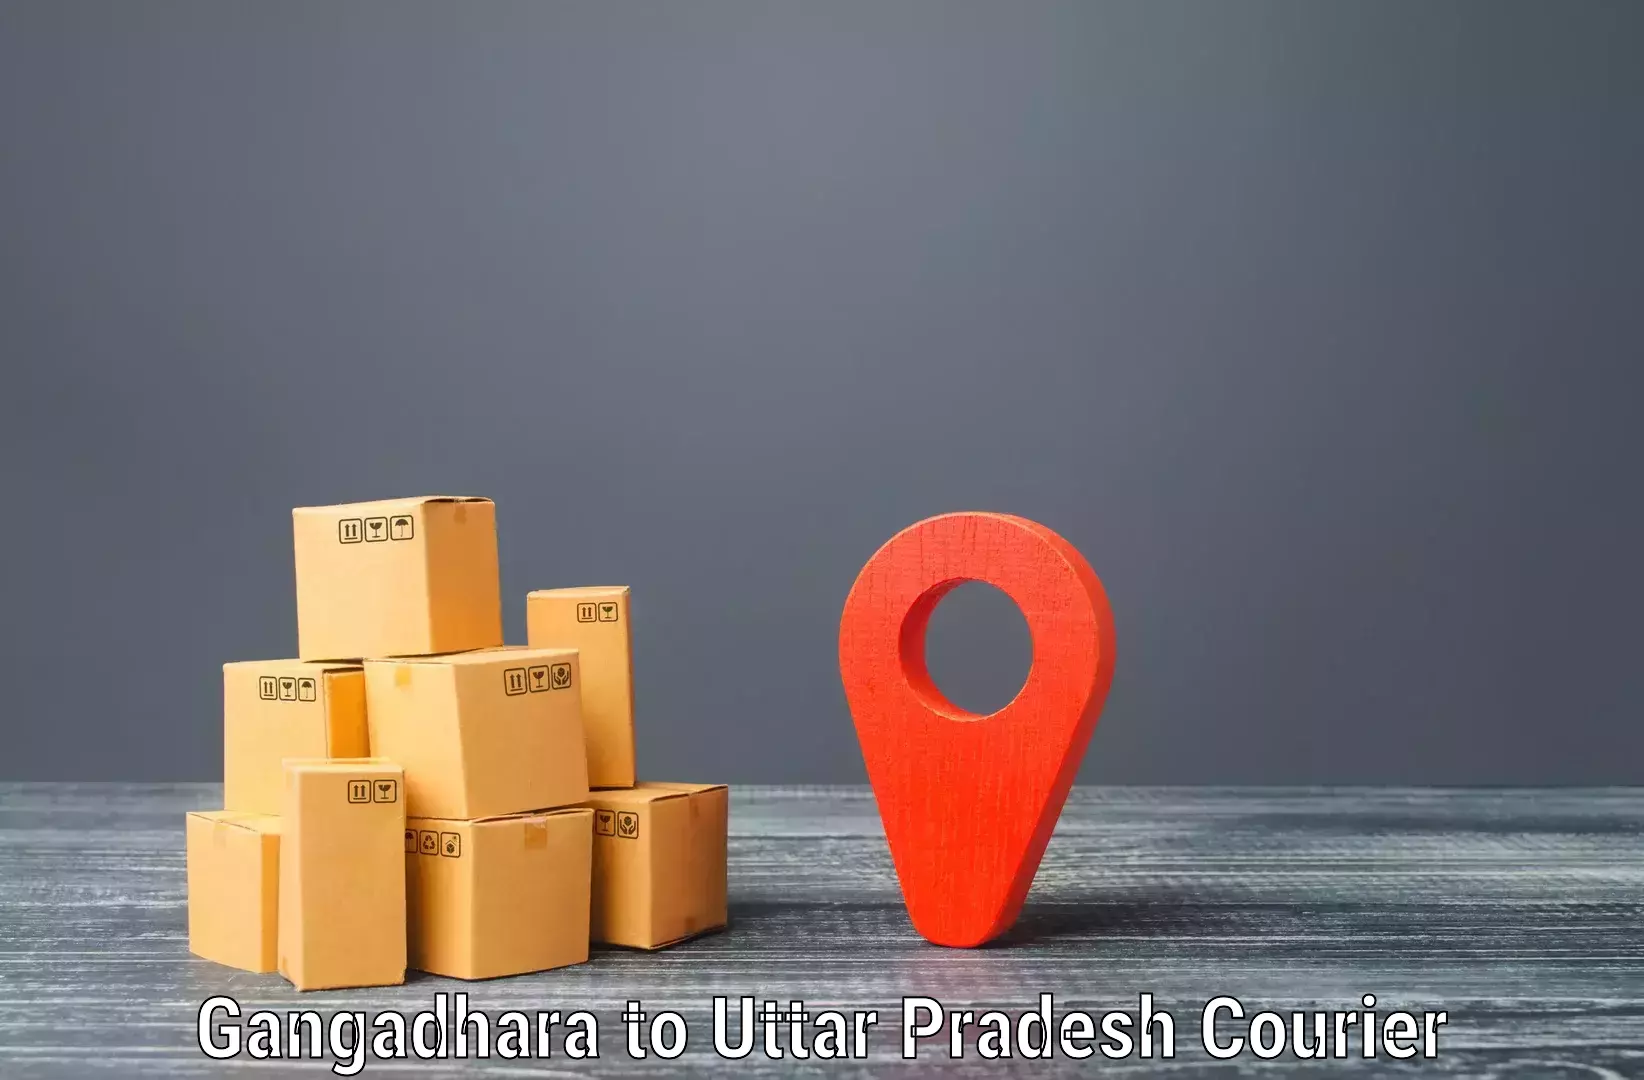 Personal courier services Gangadhara to Agra